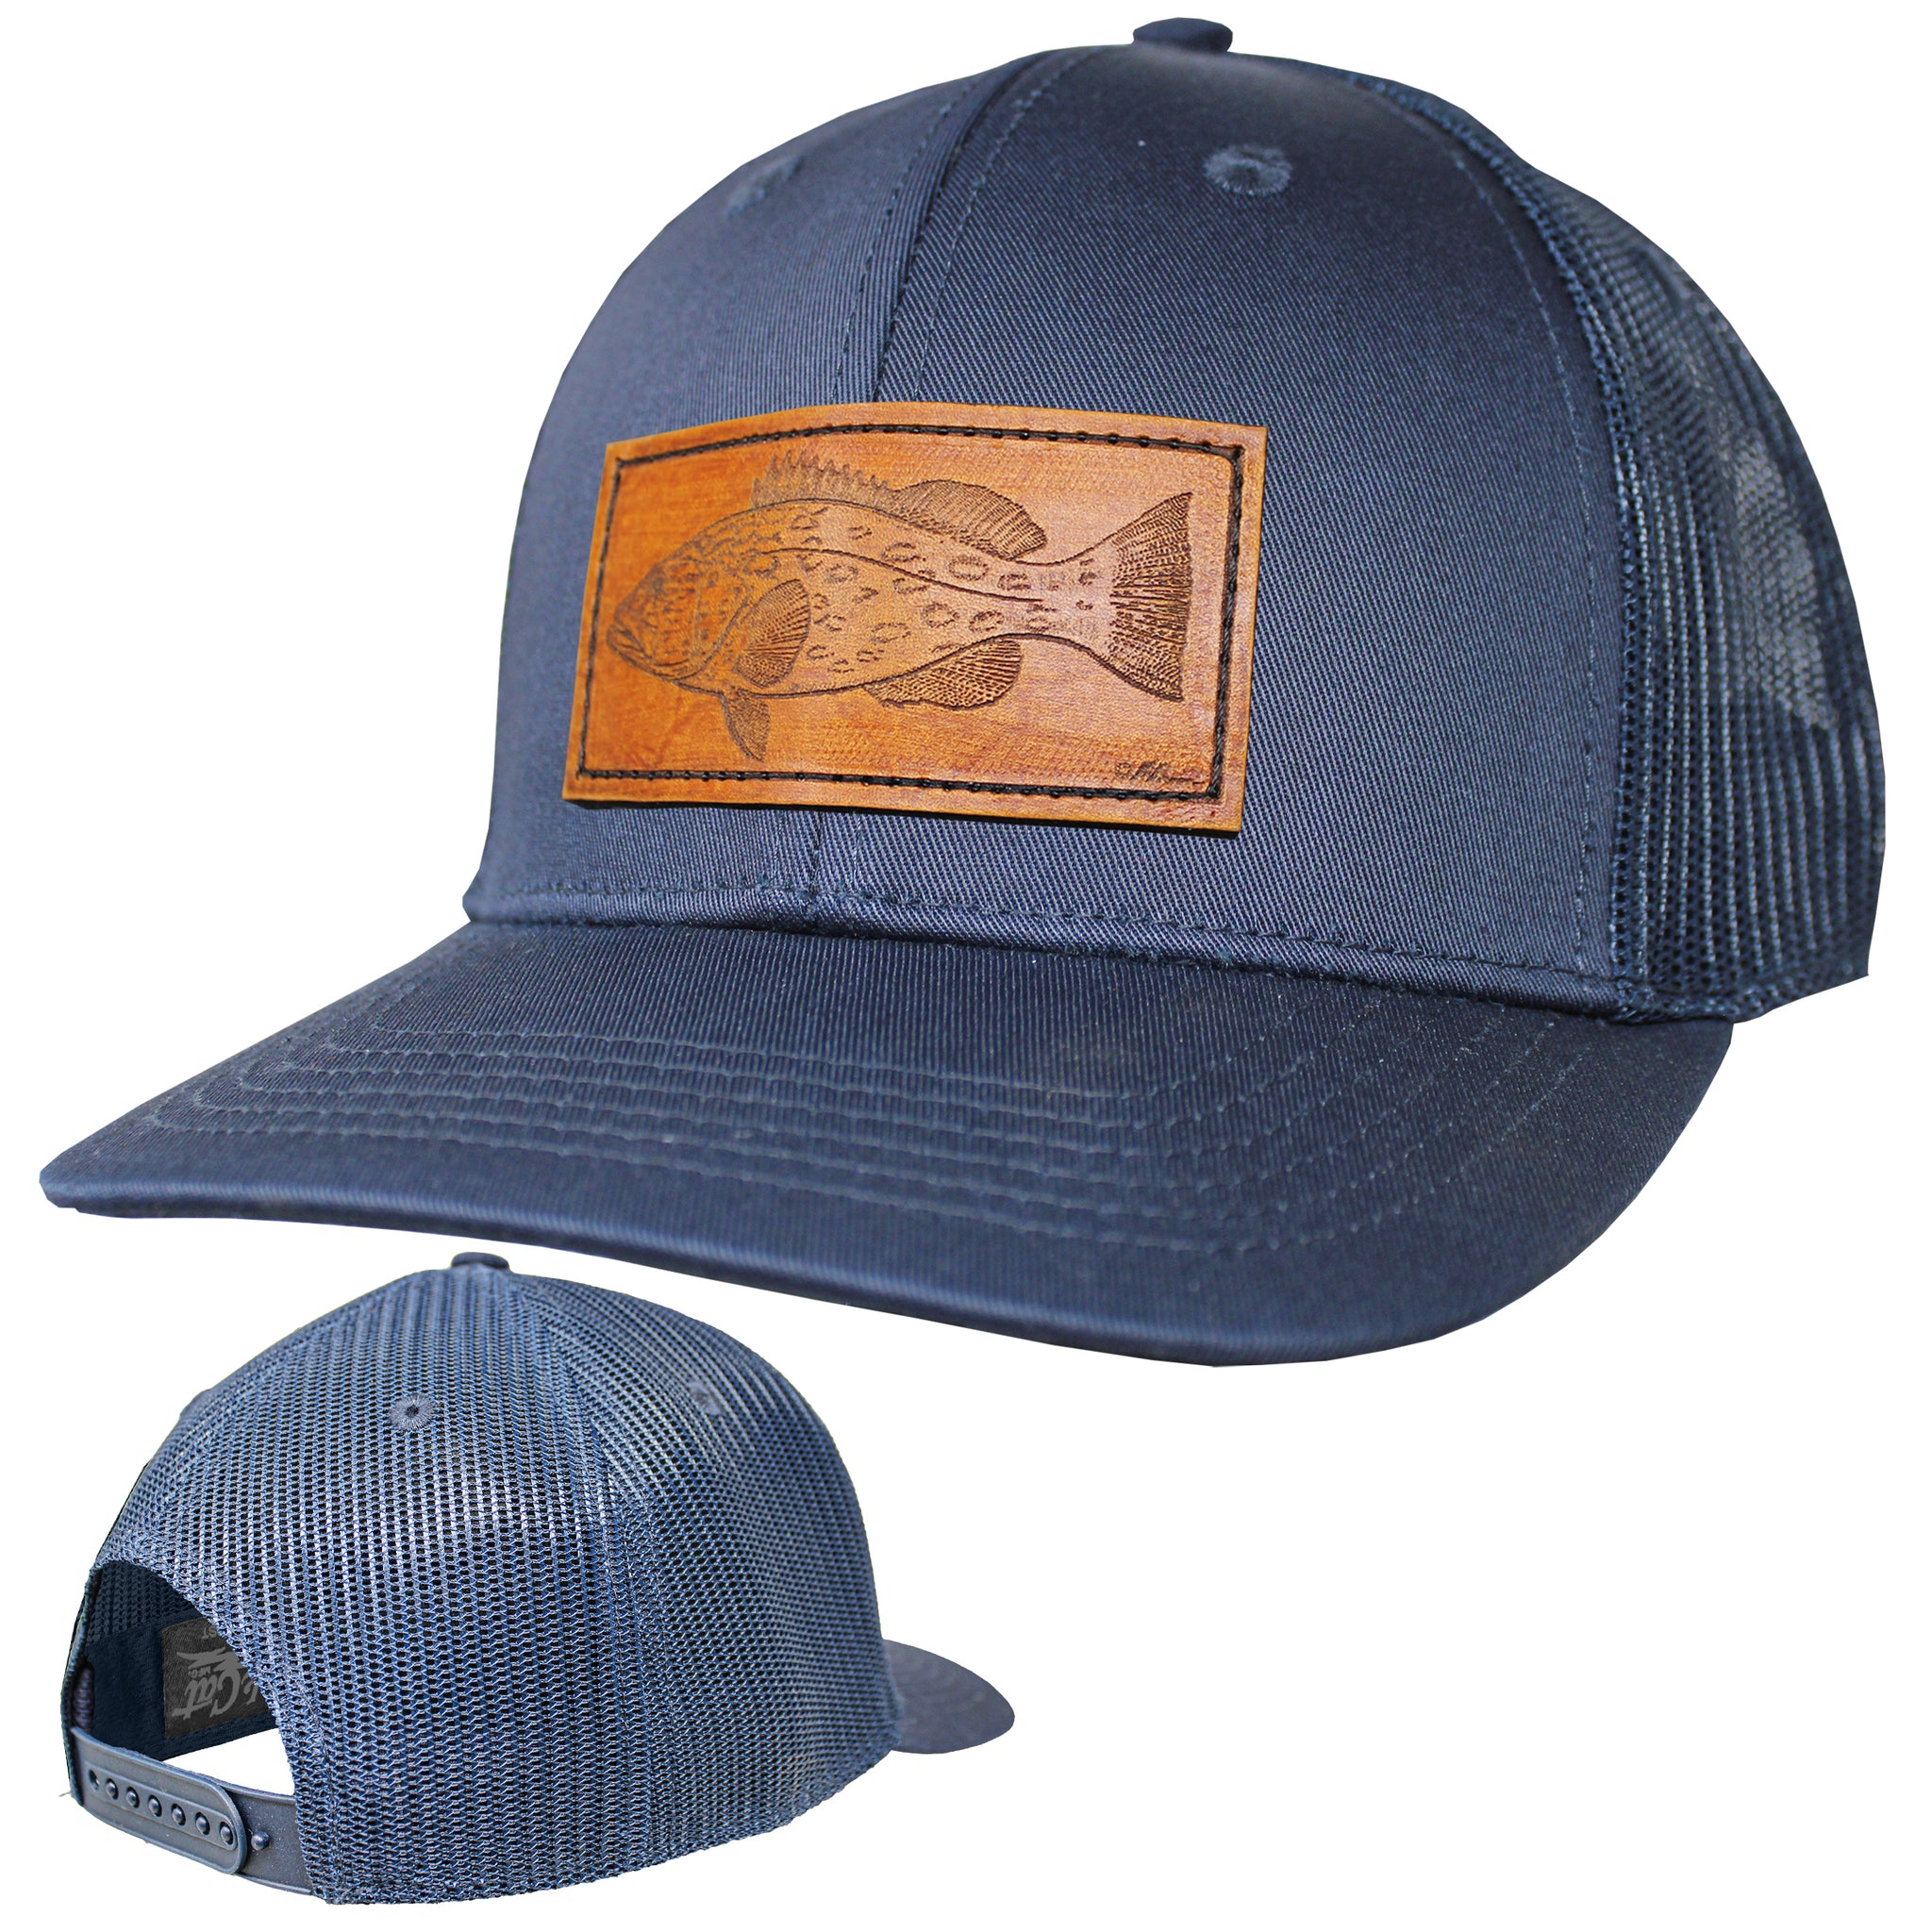 Trucker Performance Cap - GAG Grouper Leather Patch